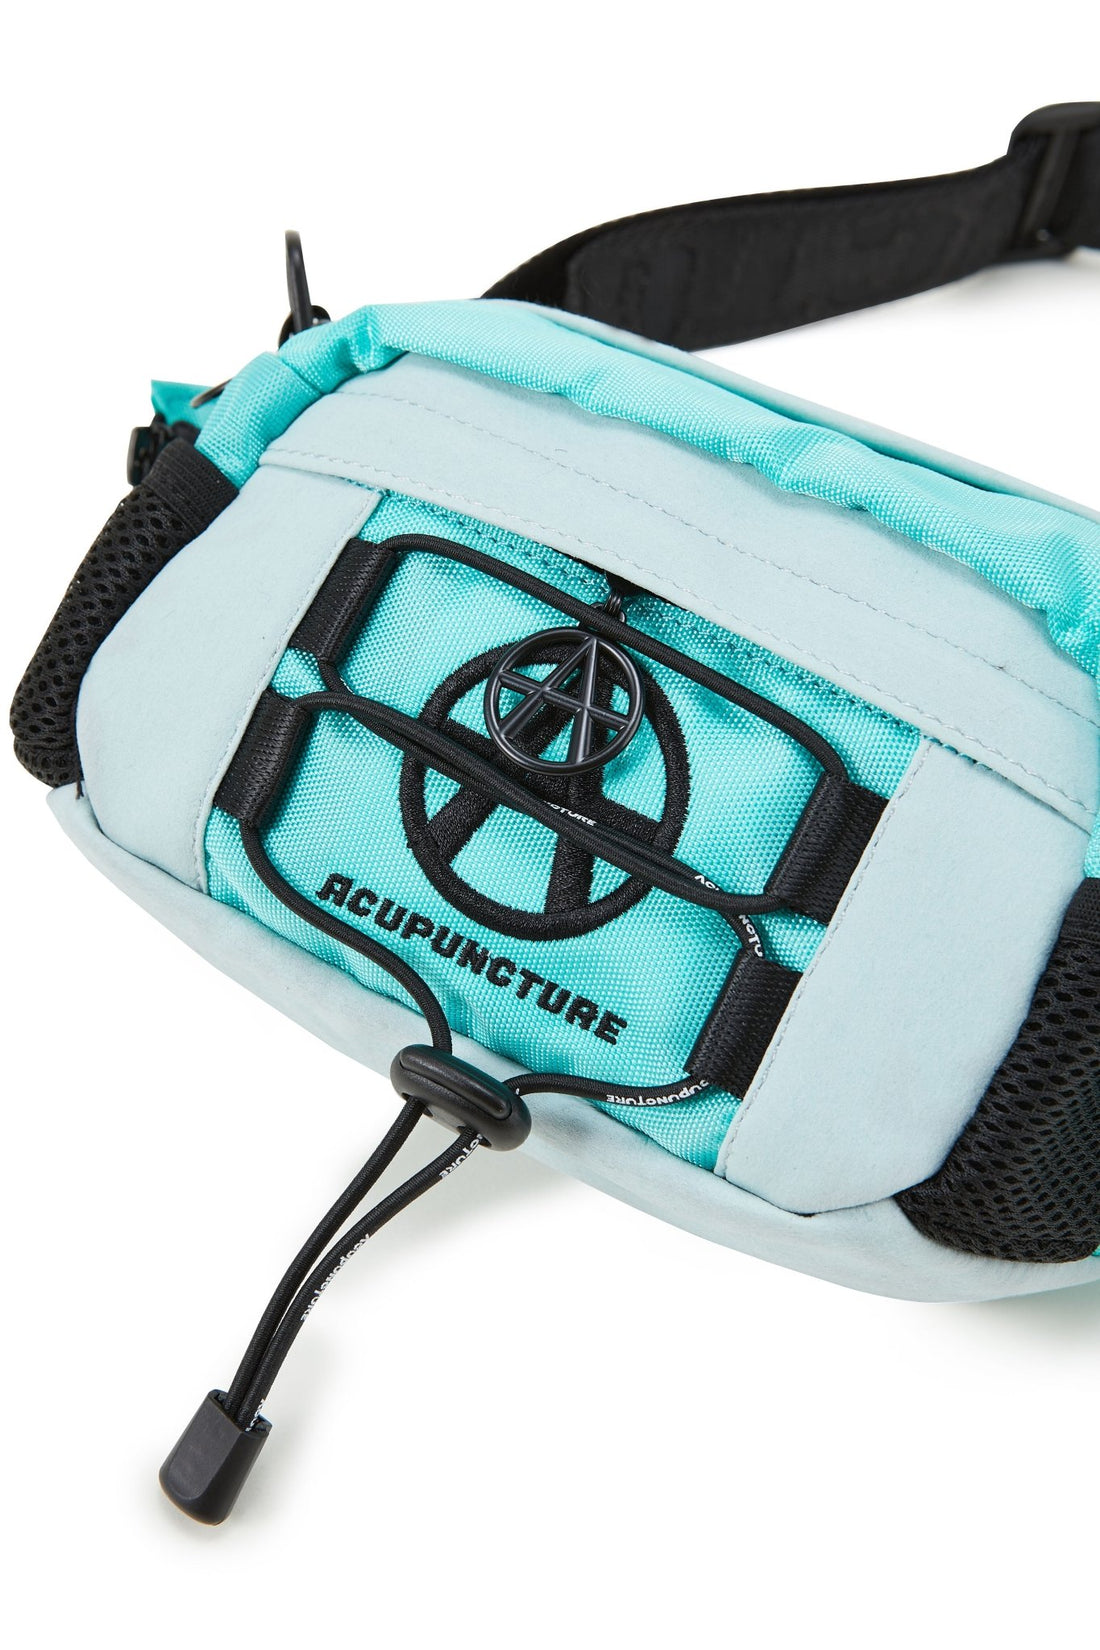 ACU FANNY PACK MINT Acupuncture